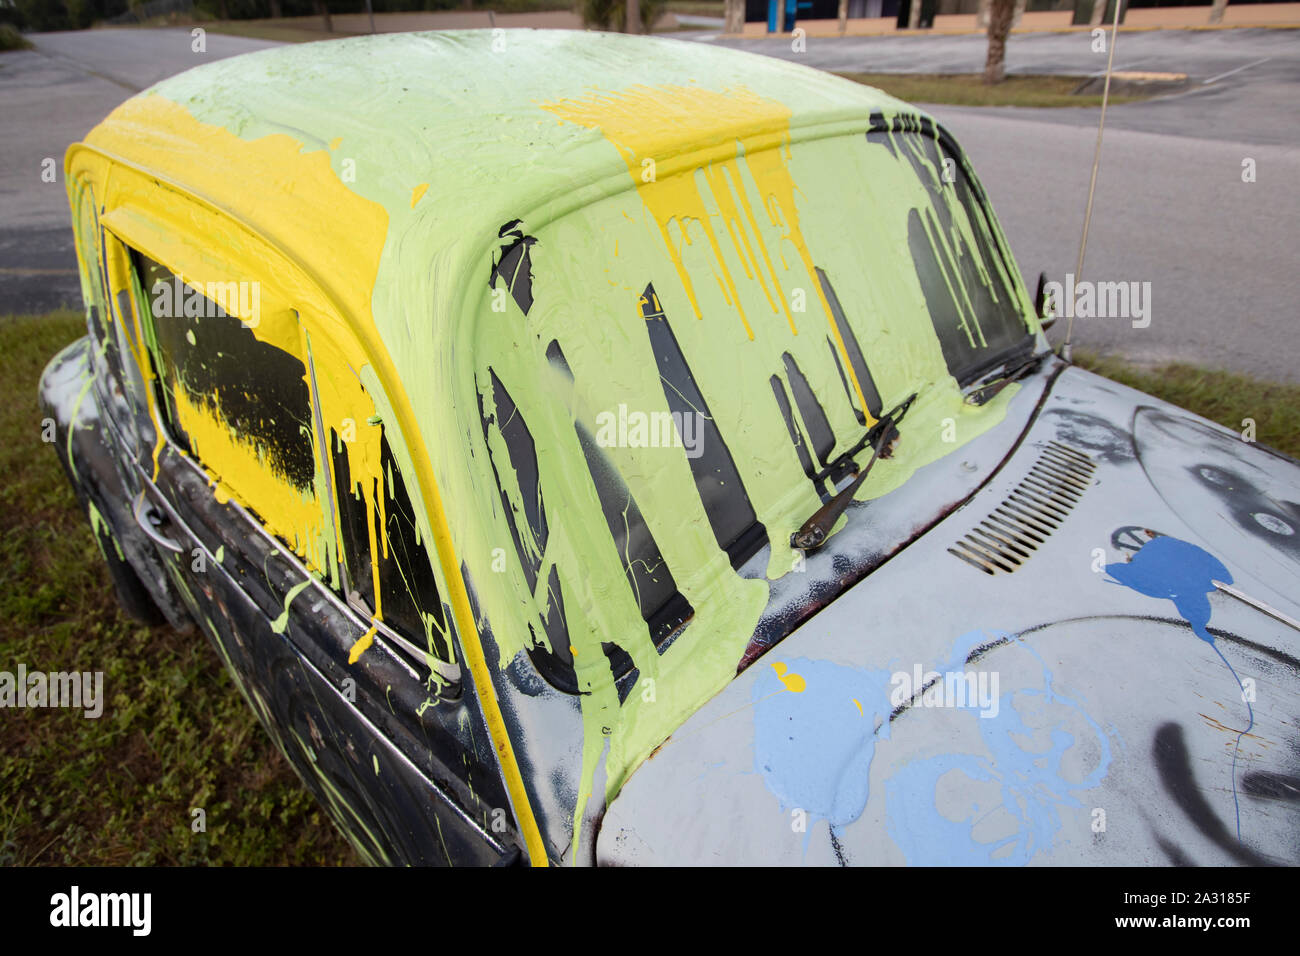 A painted hippie VW Stock Photo